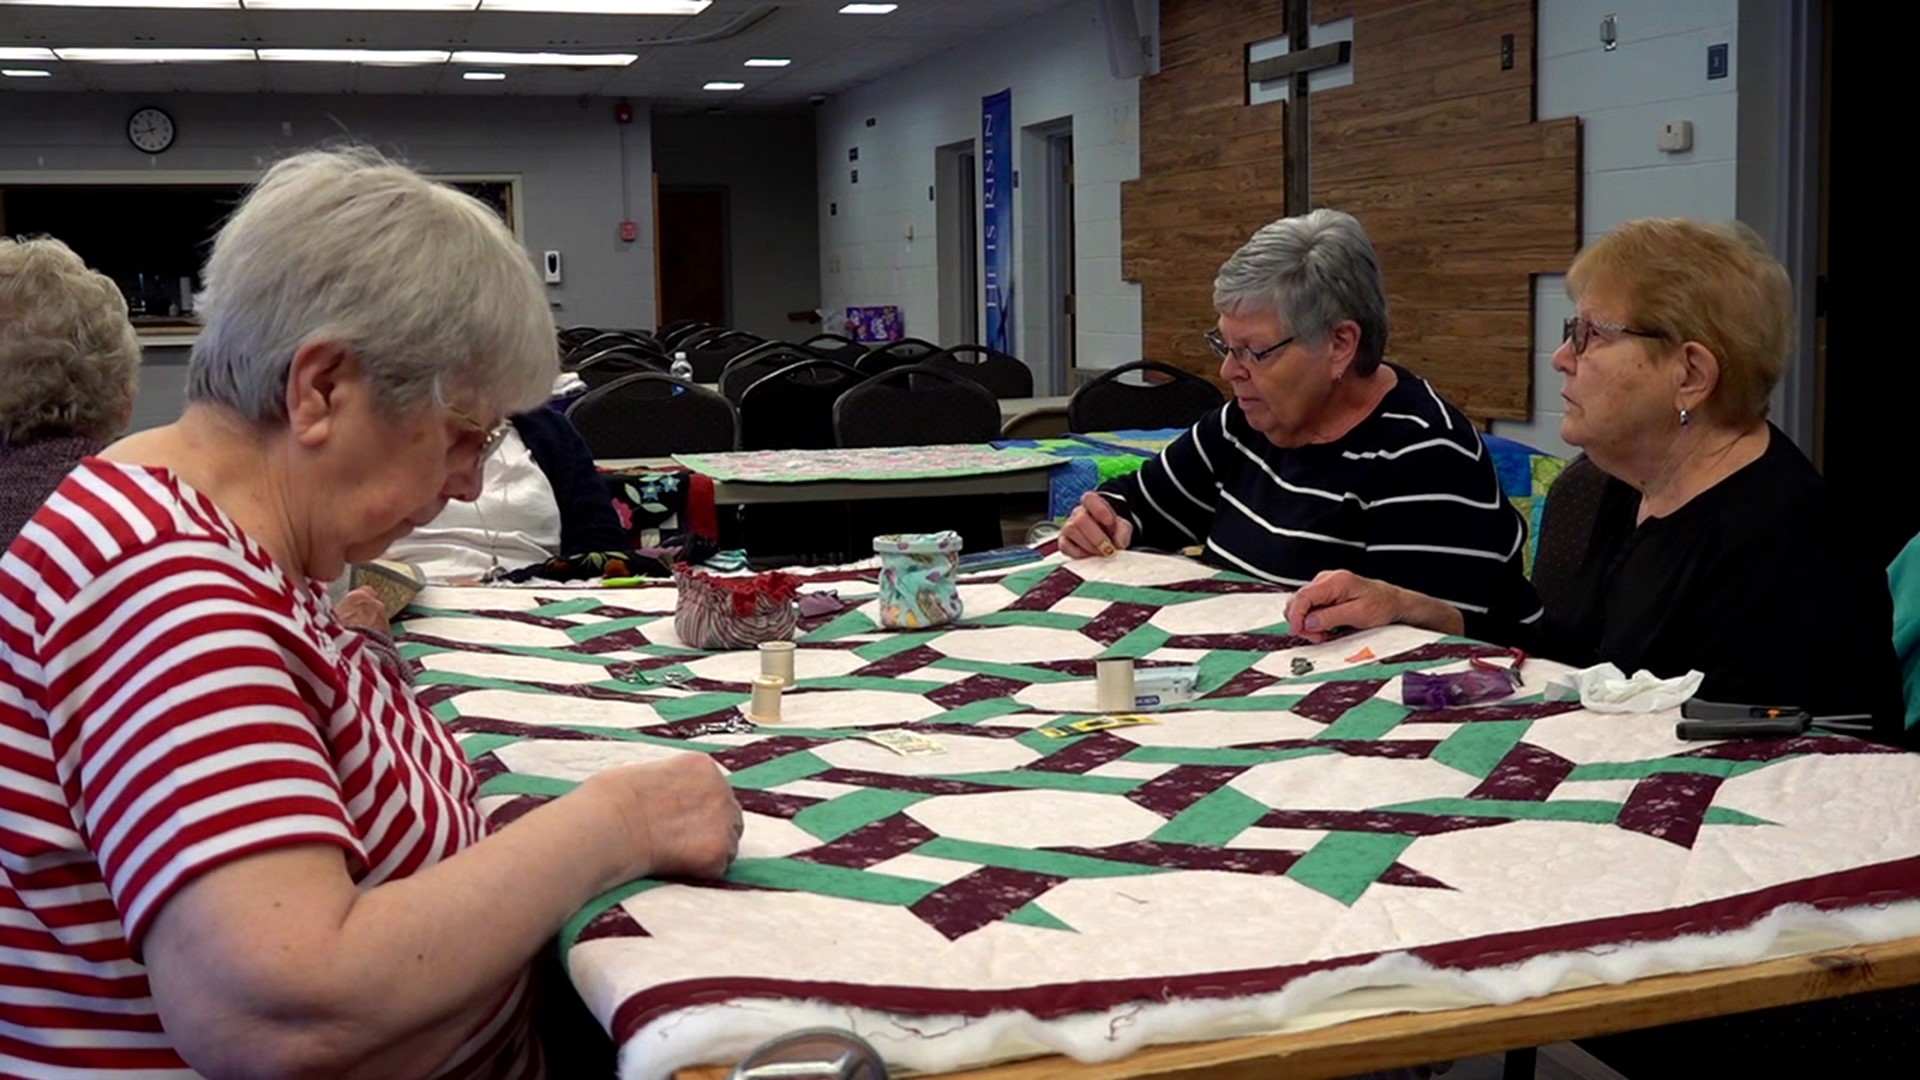 After more than a decade of making quilts for soldiers, a group in Schuylkill County received a special thank you.